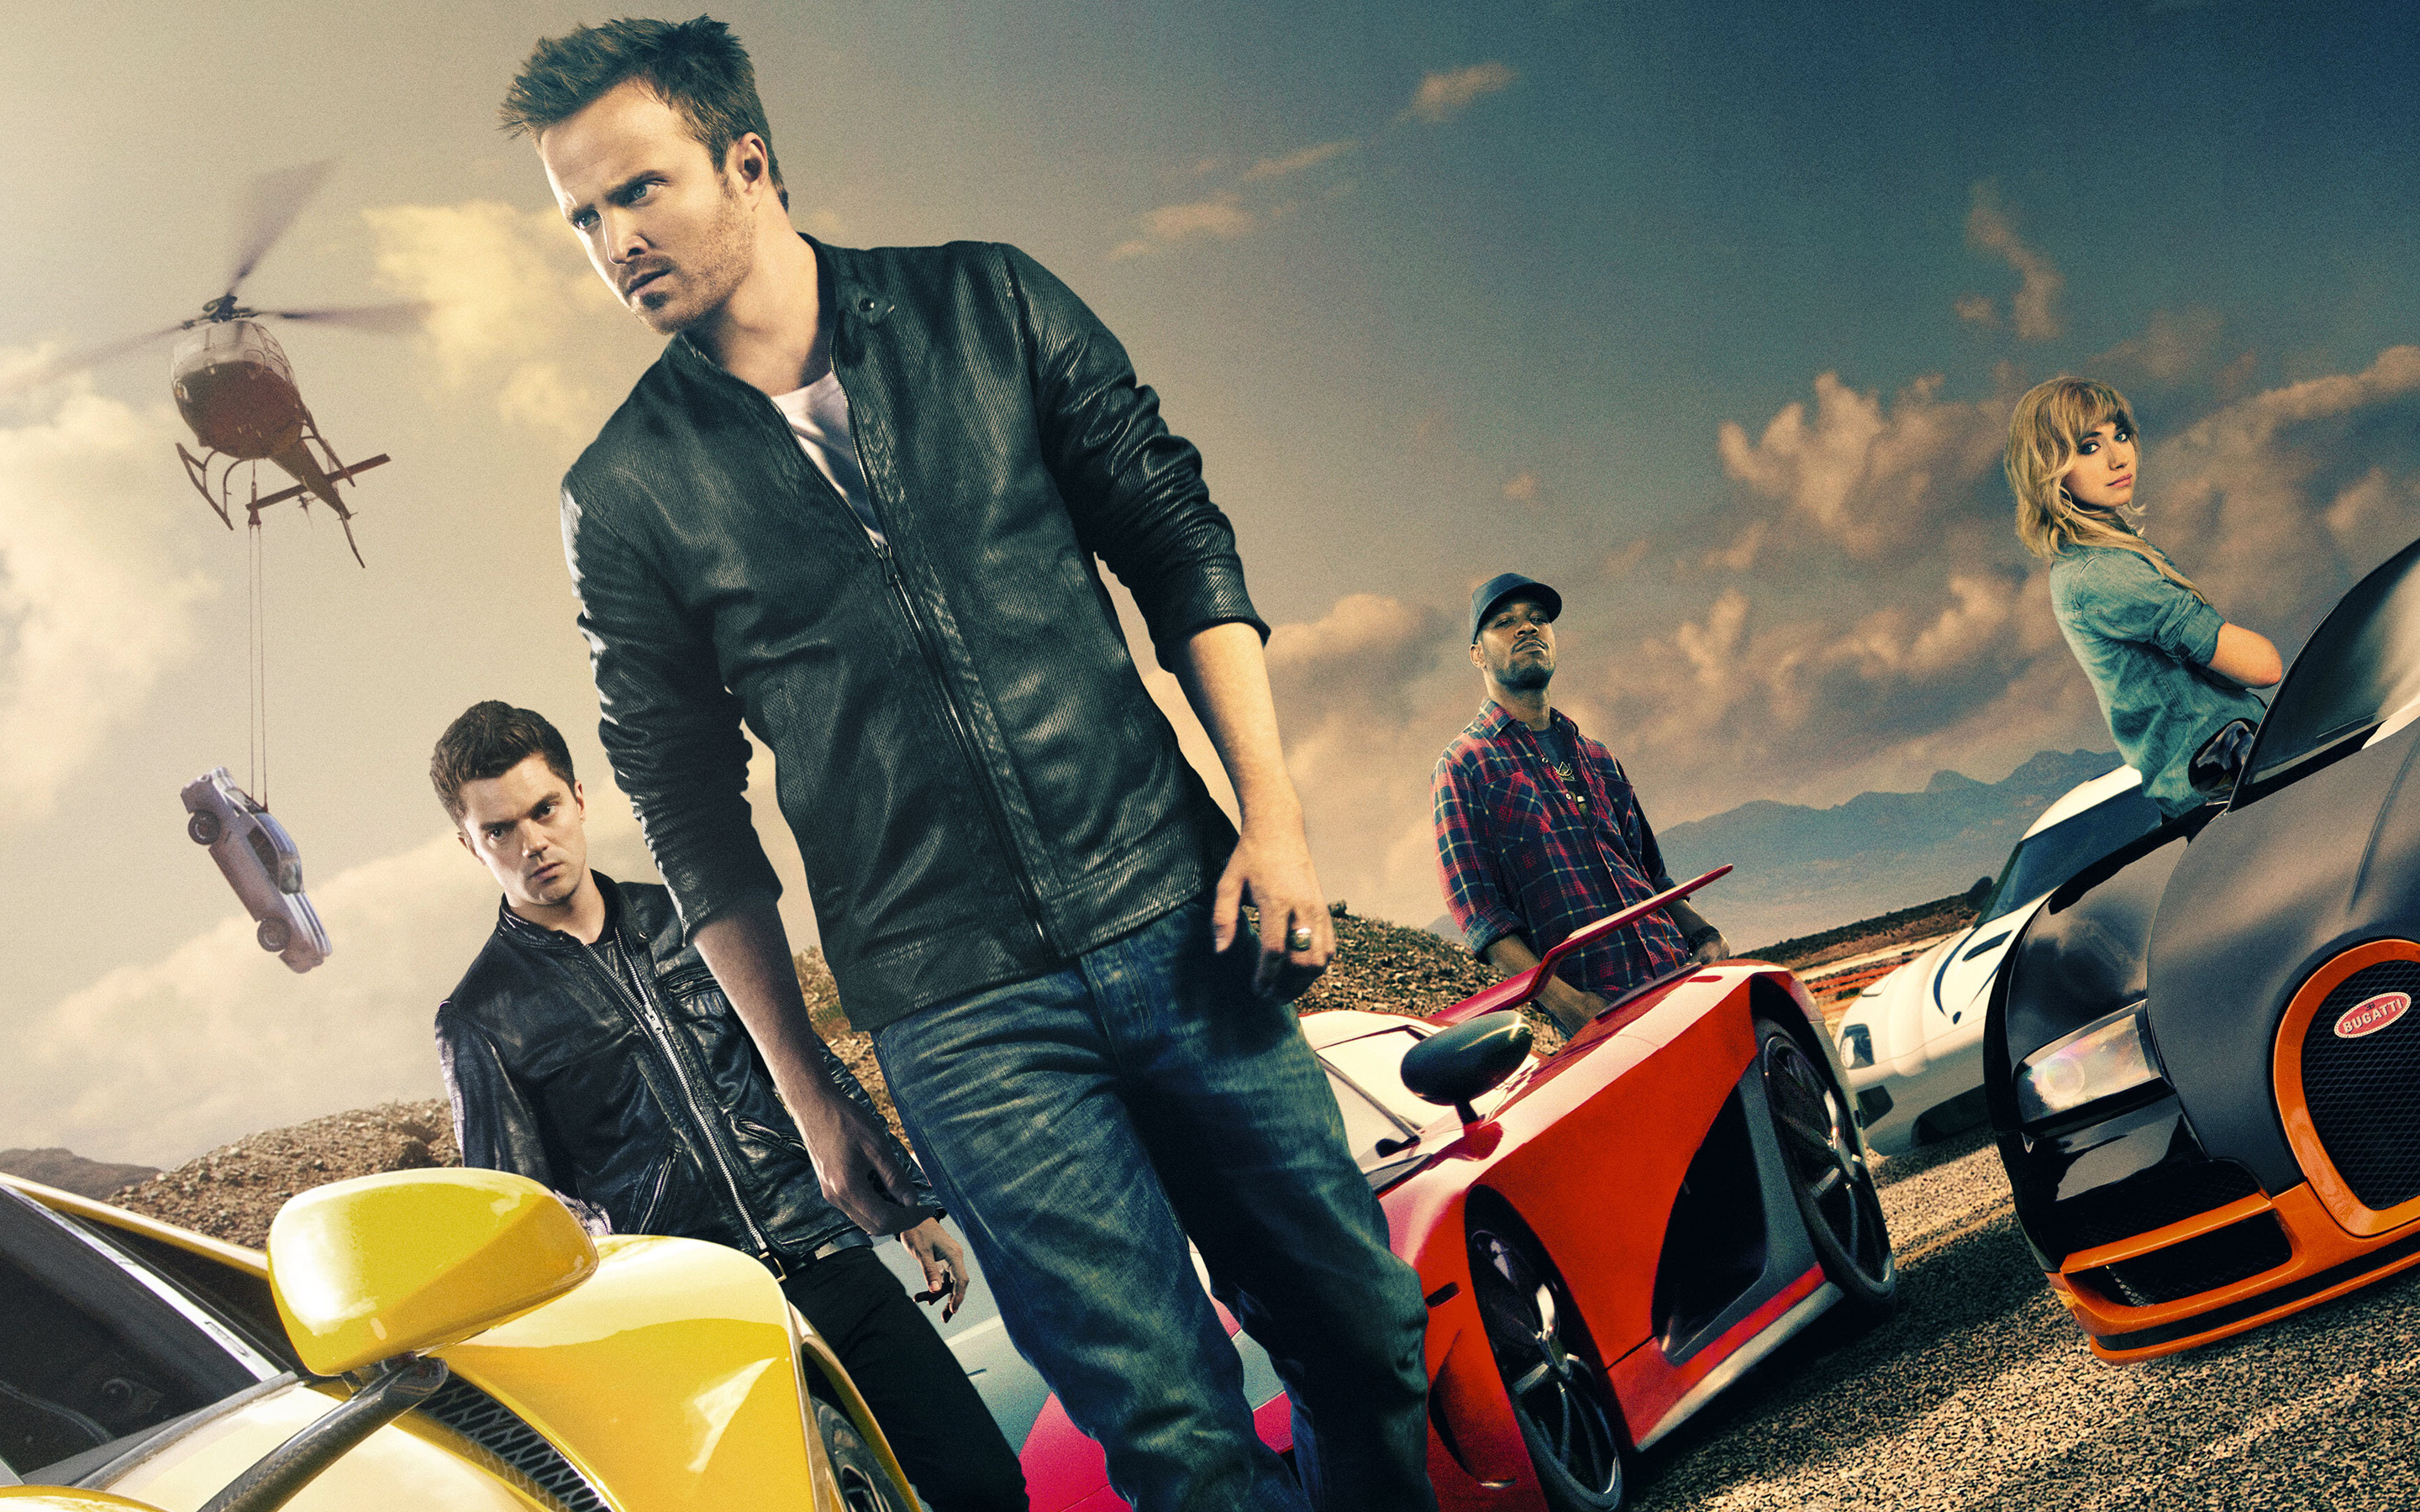 need_for_speed_2014_movie-wide